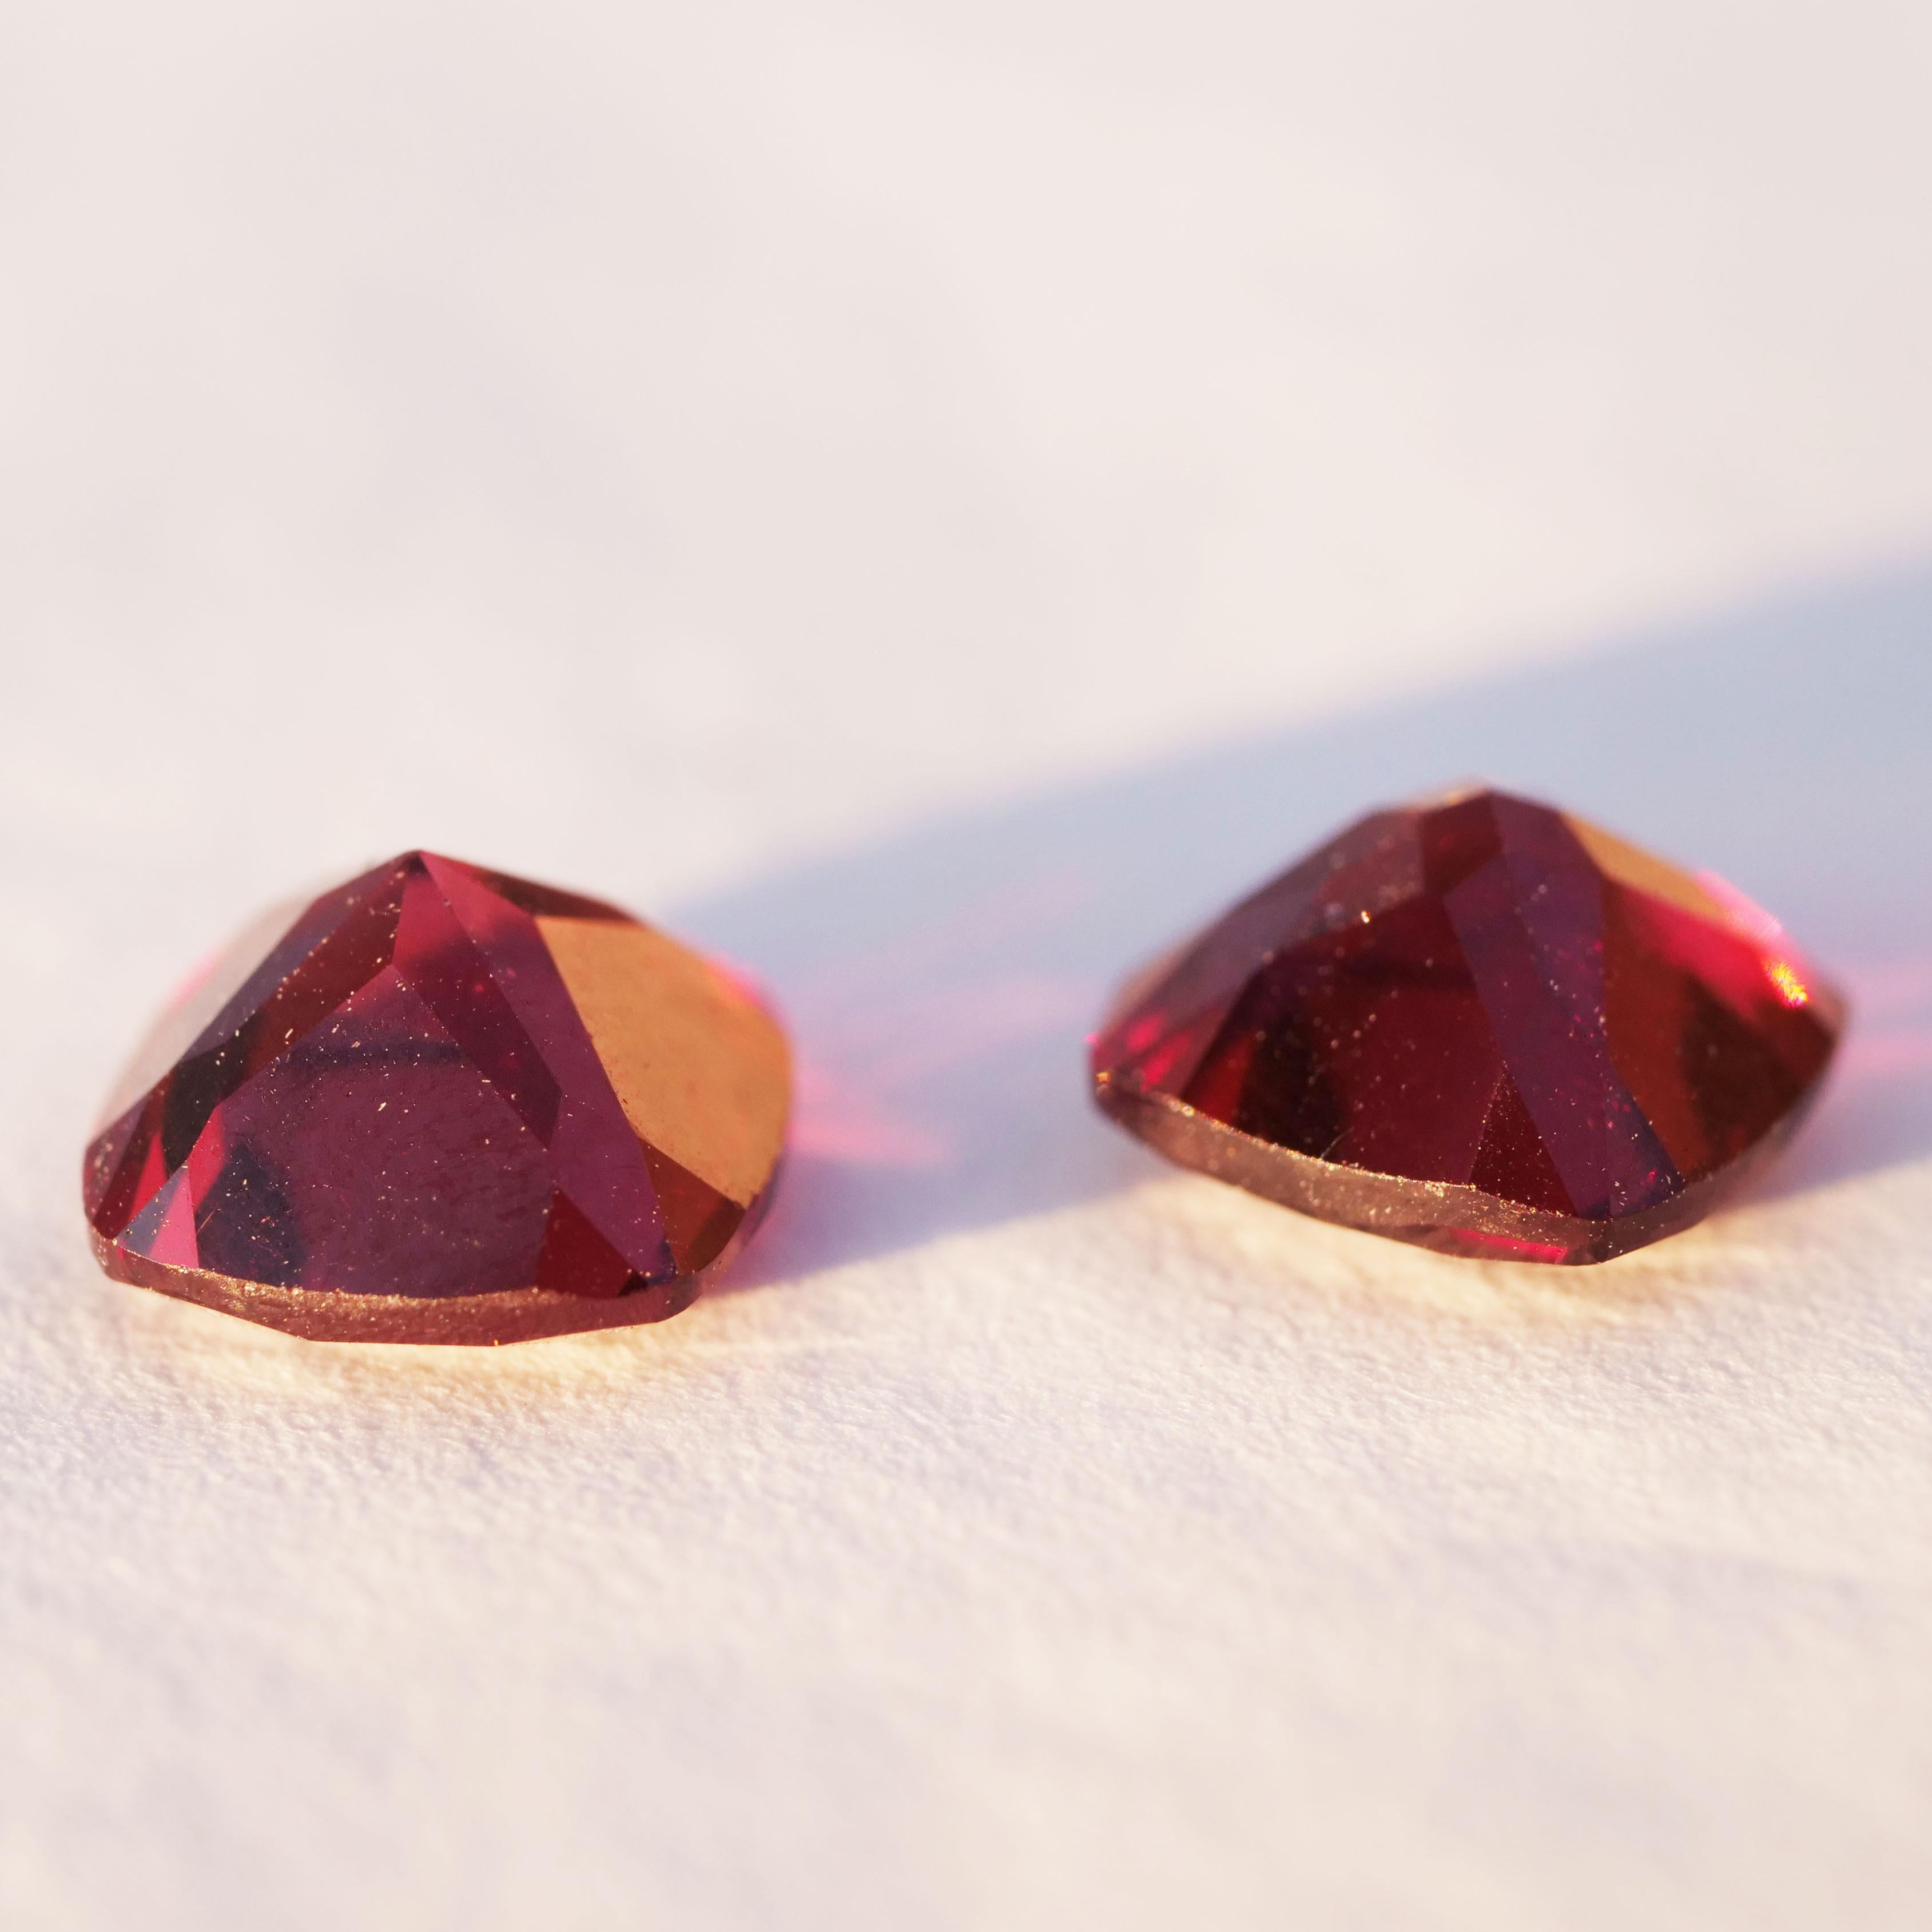 this pair of very fine red garnets can be a amazing jewelry, 2 garnets with 7 x 7 mm, 4,4 mm deep, AAA+, square cut, color light red with a flush blue, eye clean, brilliance very good, cut very good, total 3.98 ct, Create your own earrings, buying